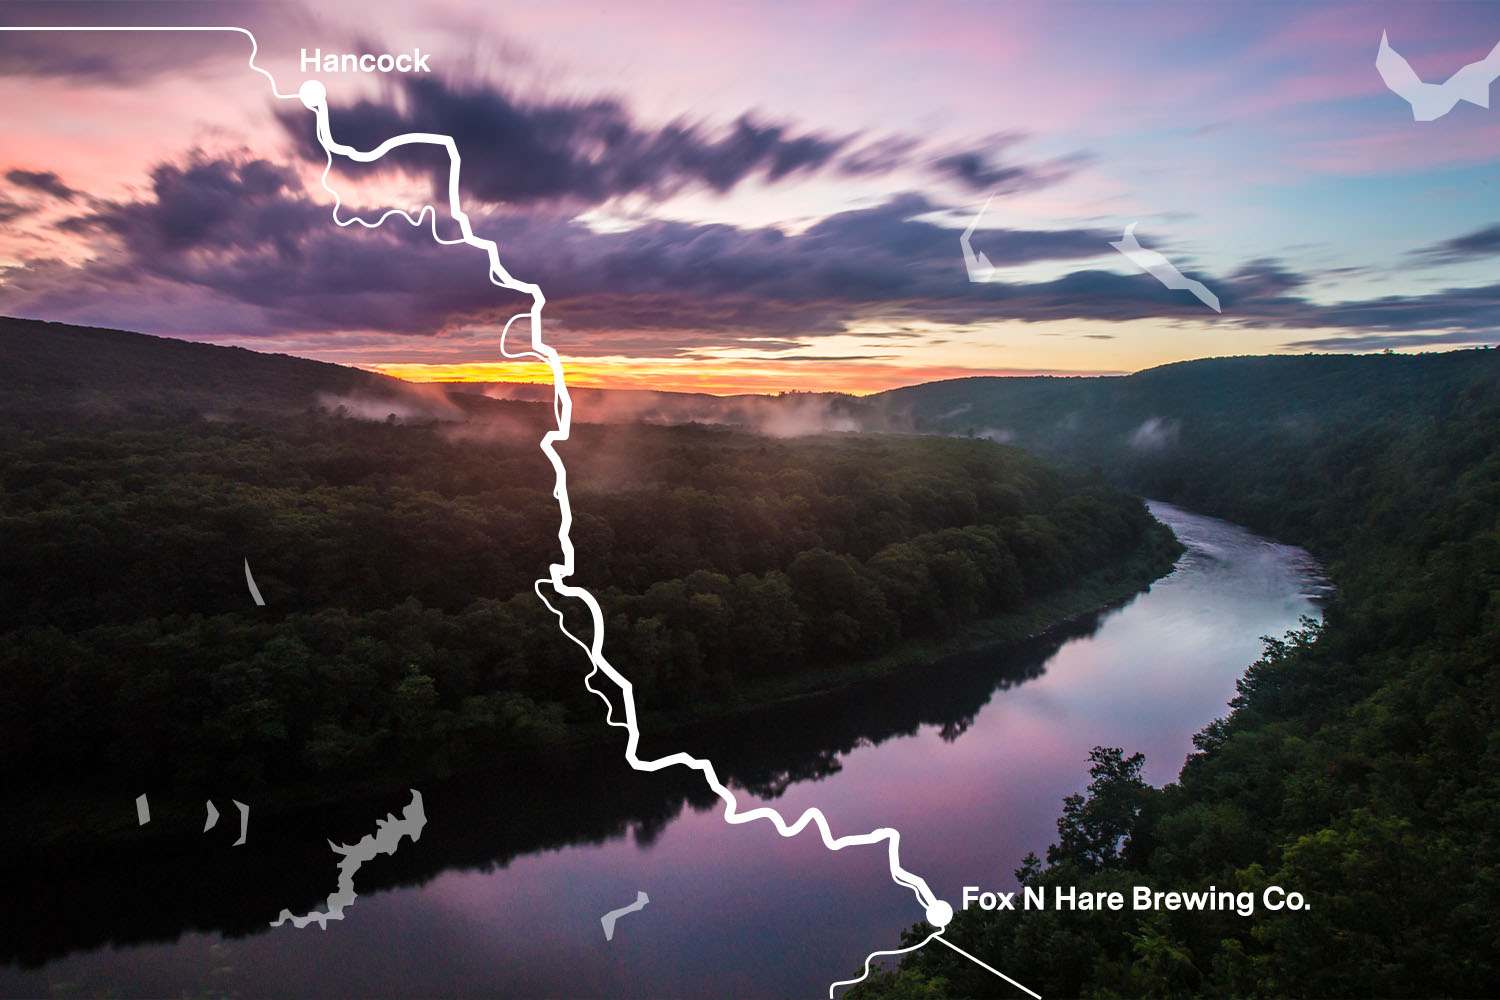 The Best Scenic Drive in the Tri-State Area is NY 97, The Hawk’s Nest Highway